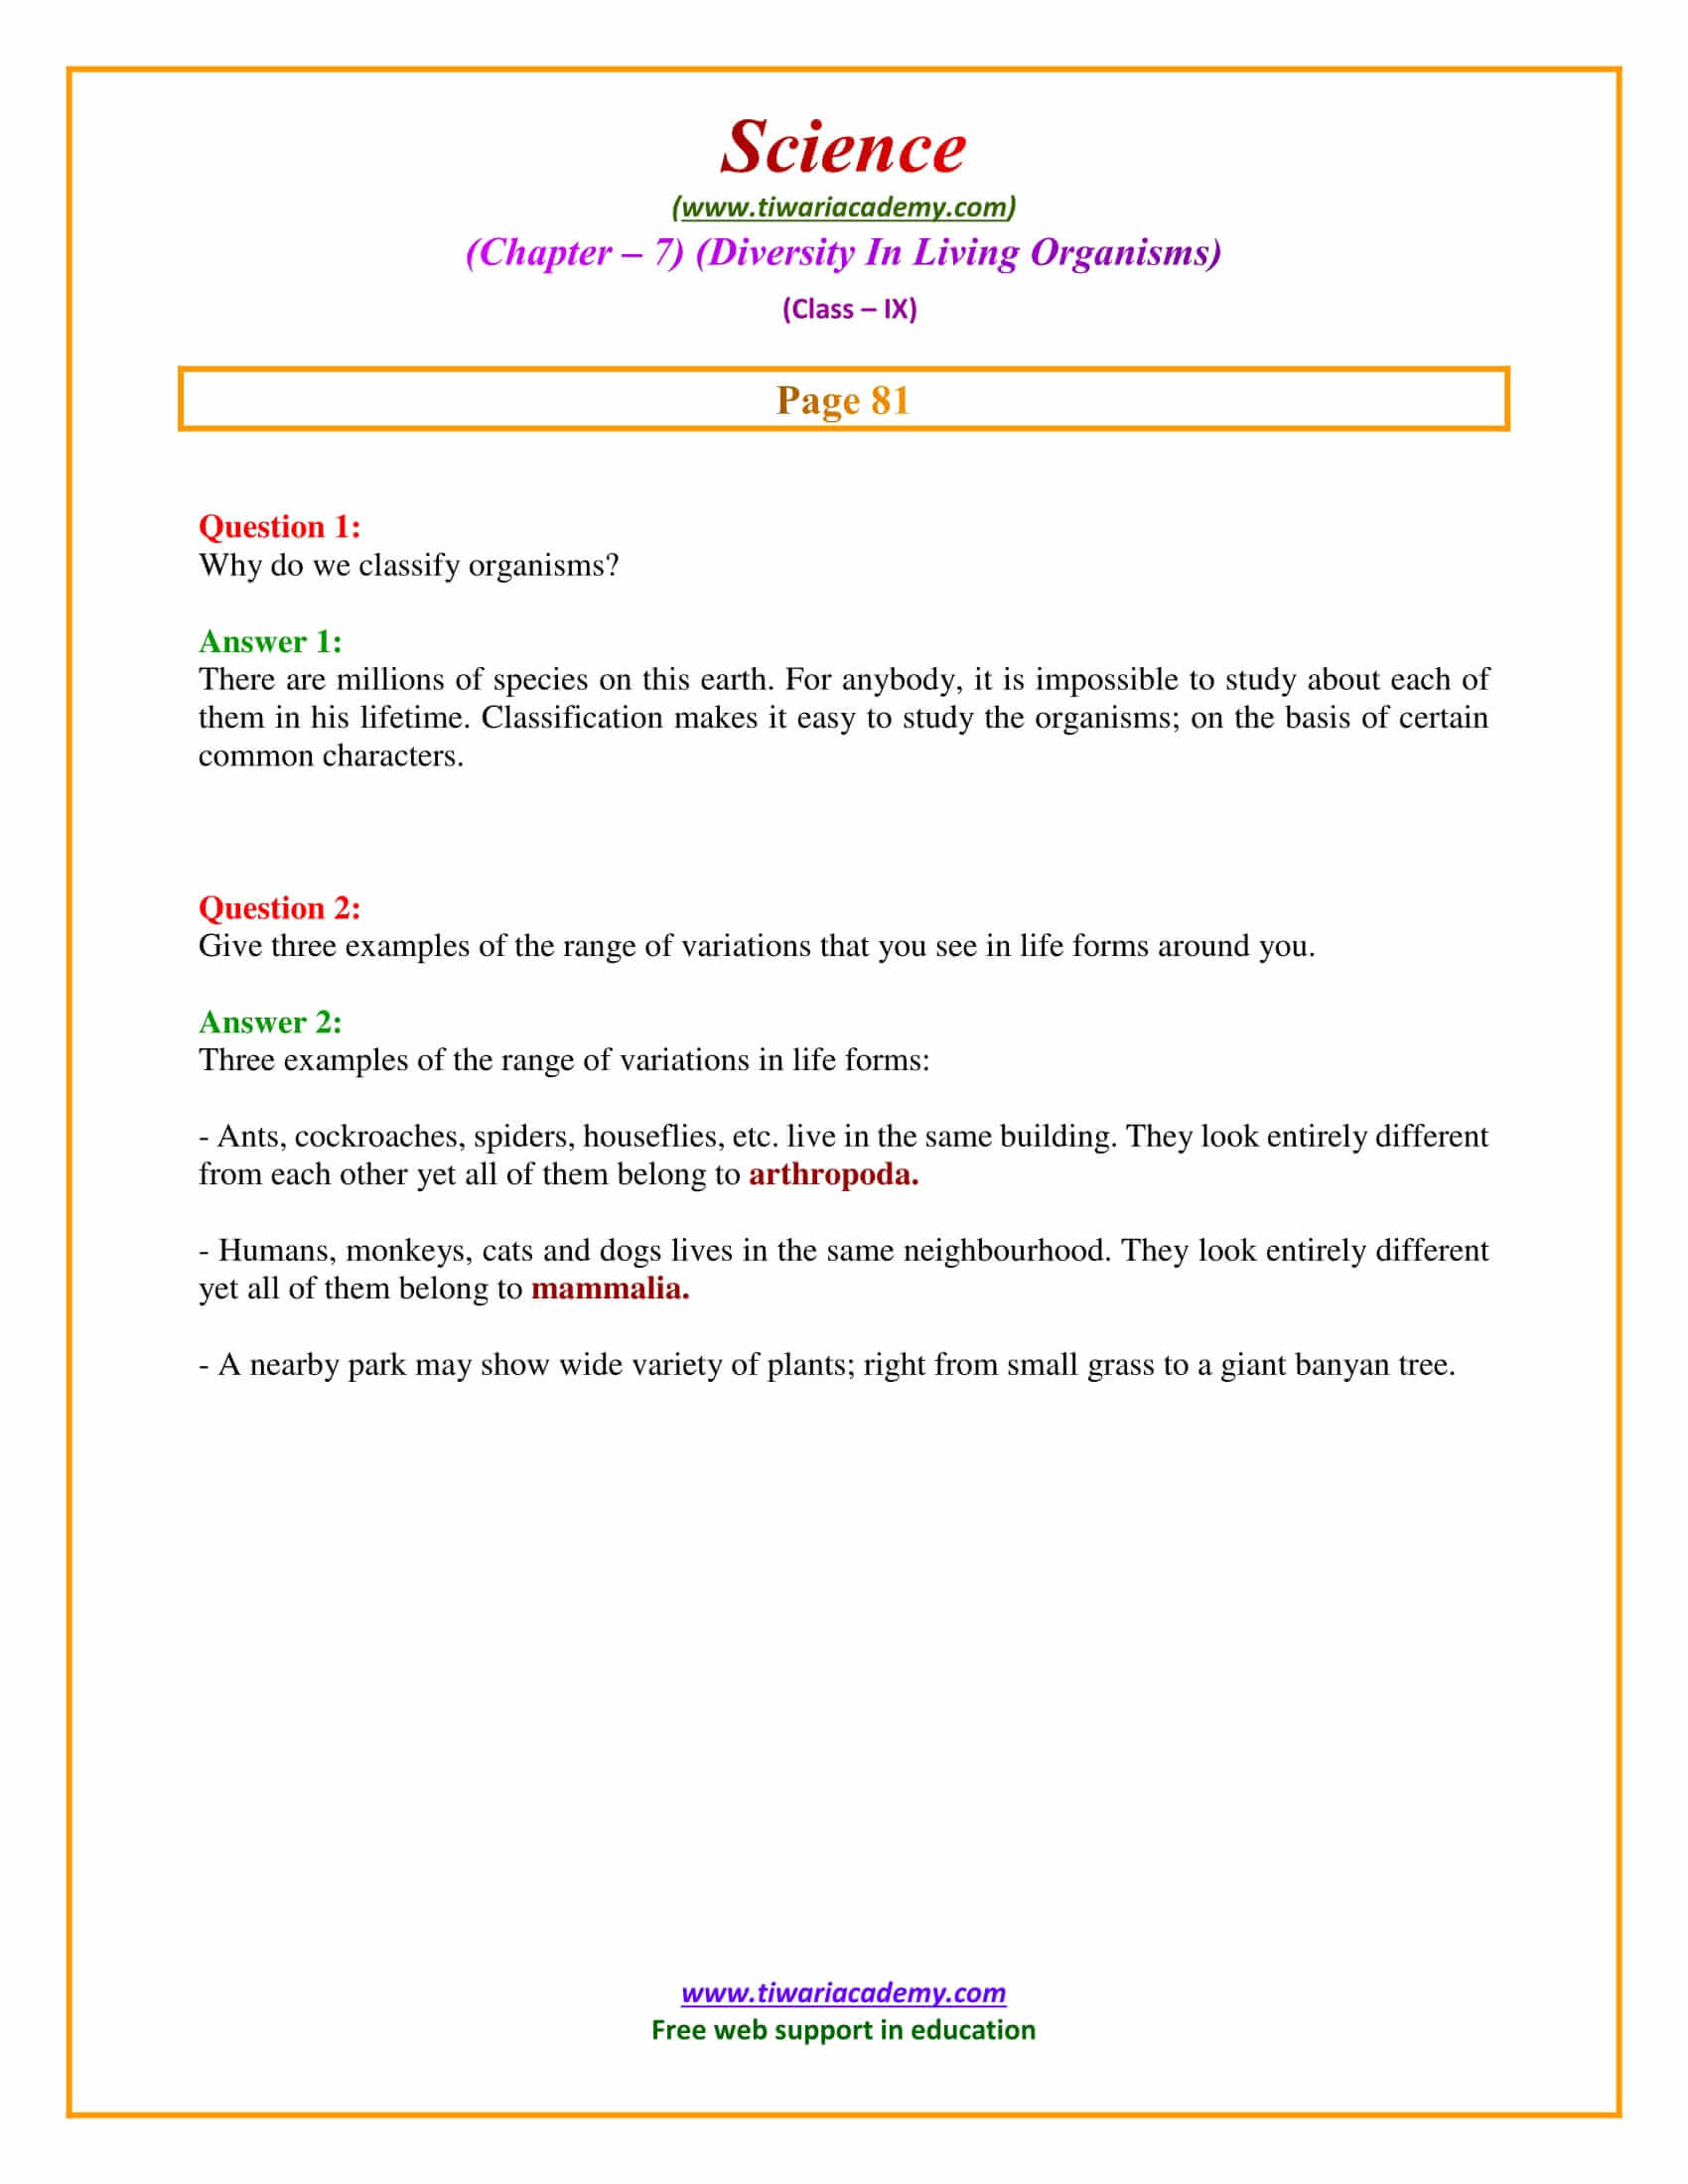 NCERT Solutions for Class 9 Science Chapter 7 Diversity in Living Organisms Intext questions page 81